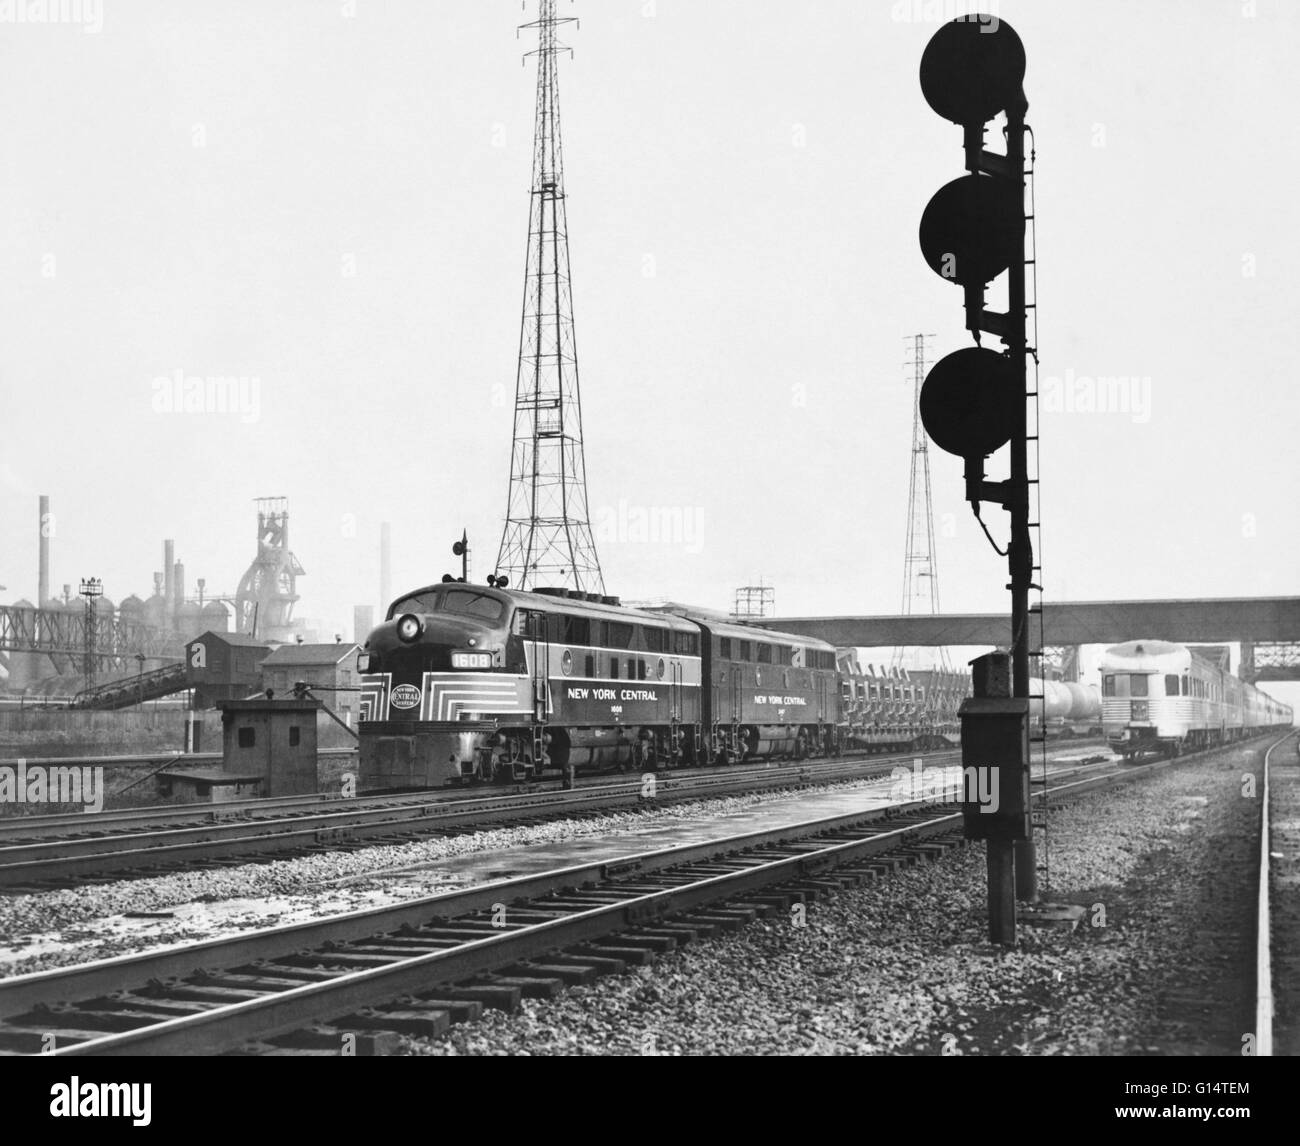 Historic image of a New York Central freight train, believed to be an EMD E8, as it passes the steel mills at Indiana Harbor, Indiana, on the New York Central's Buffalo-Chicago line. Stock Photo